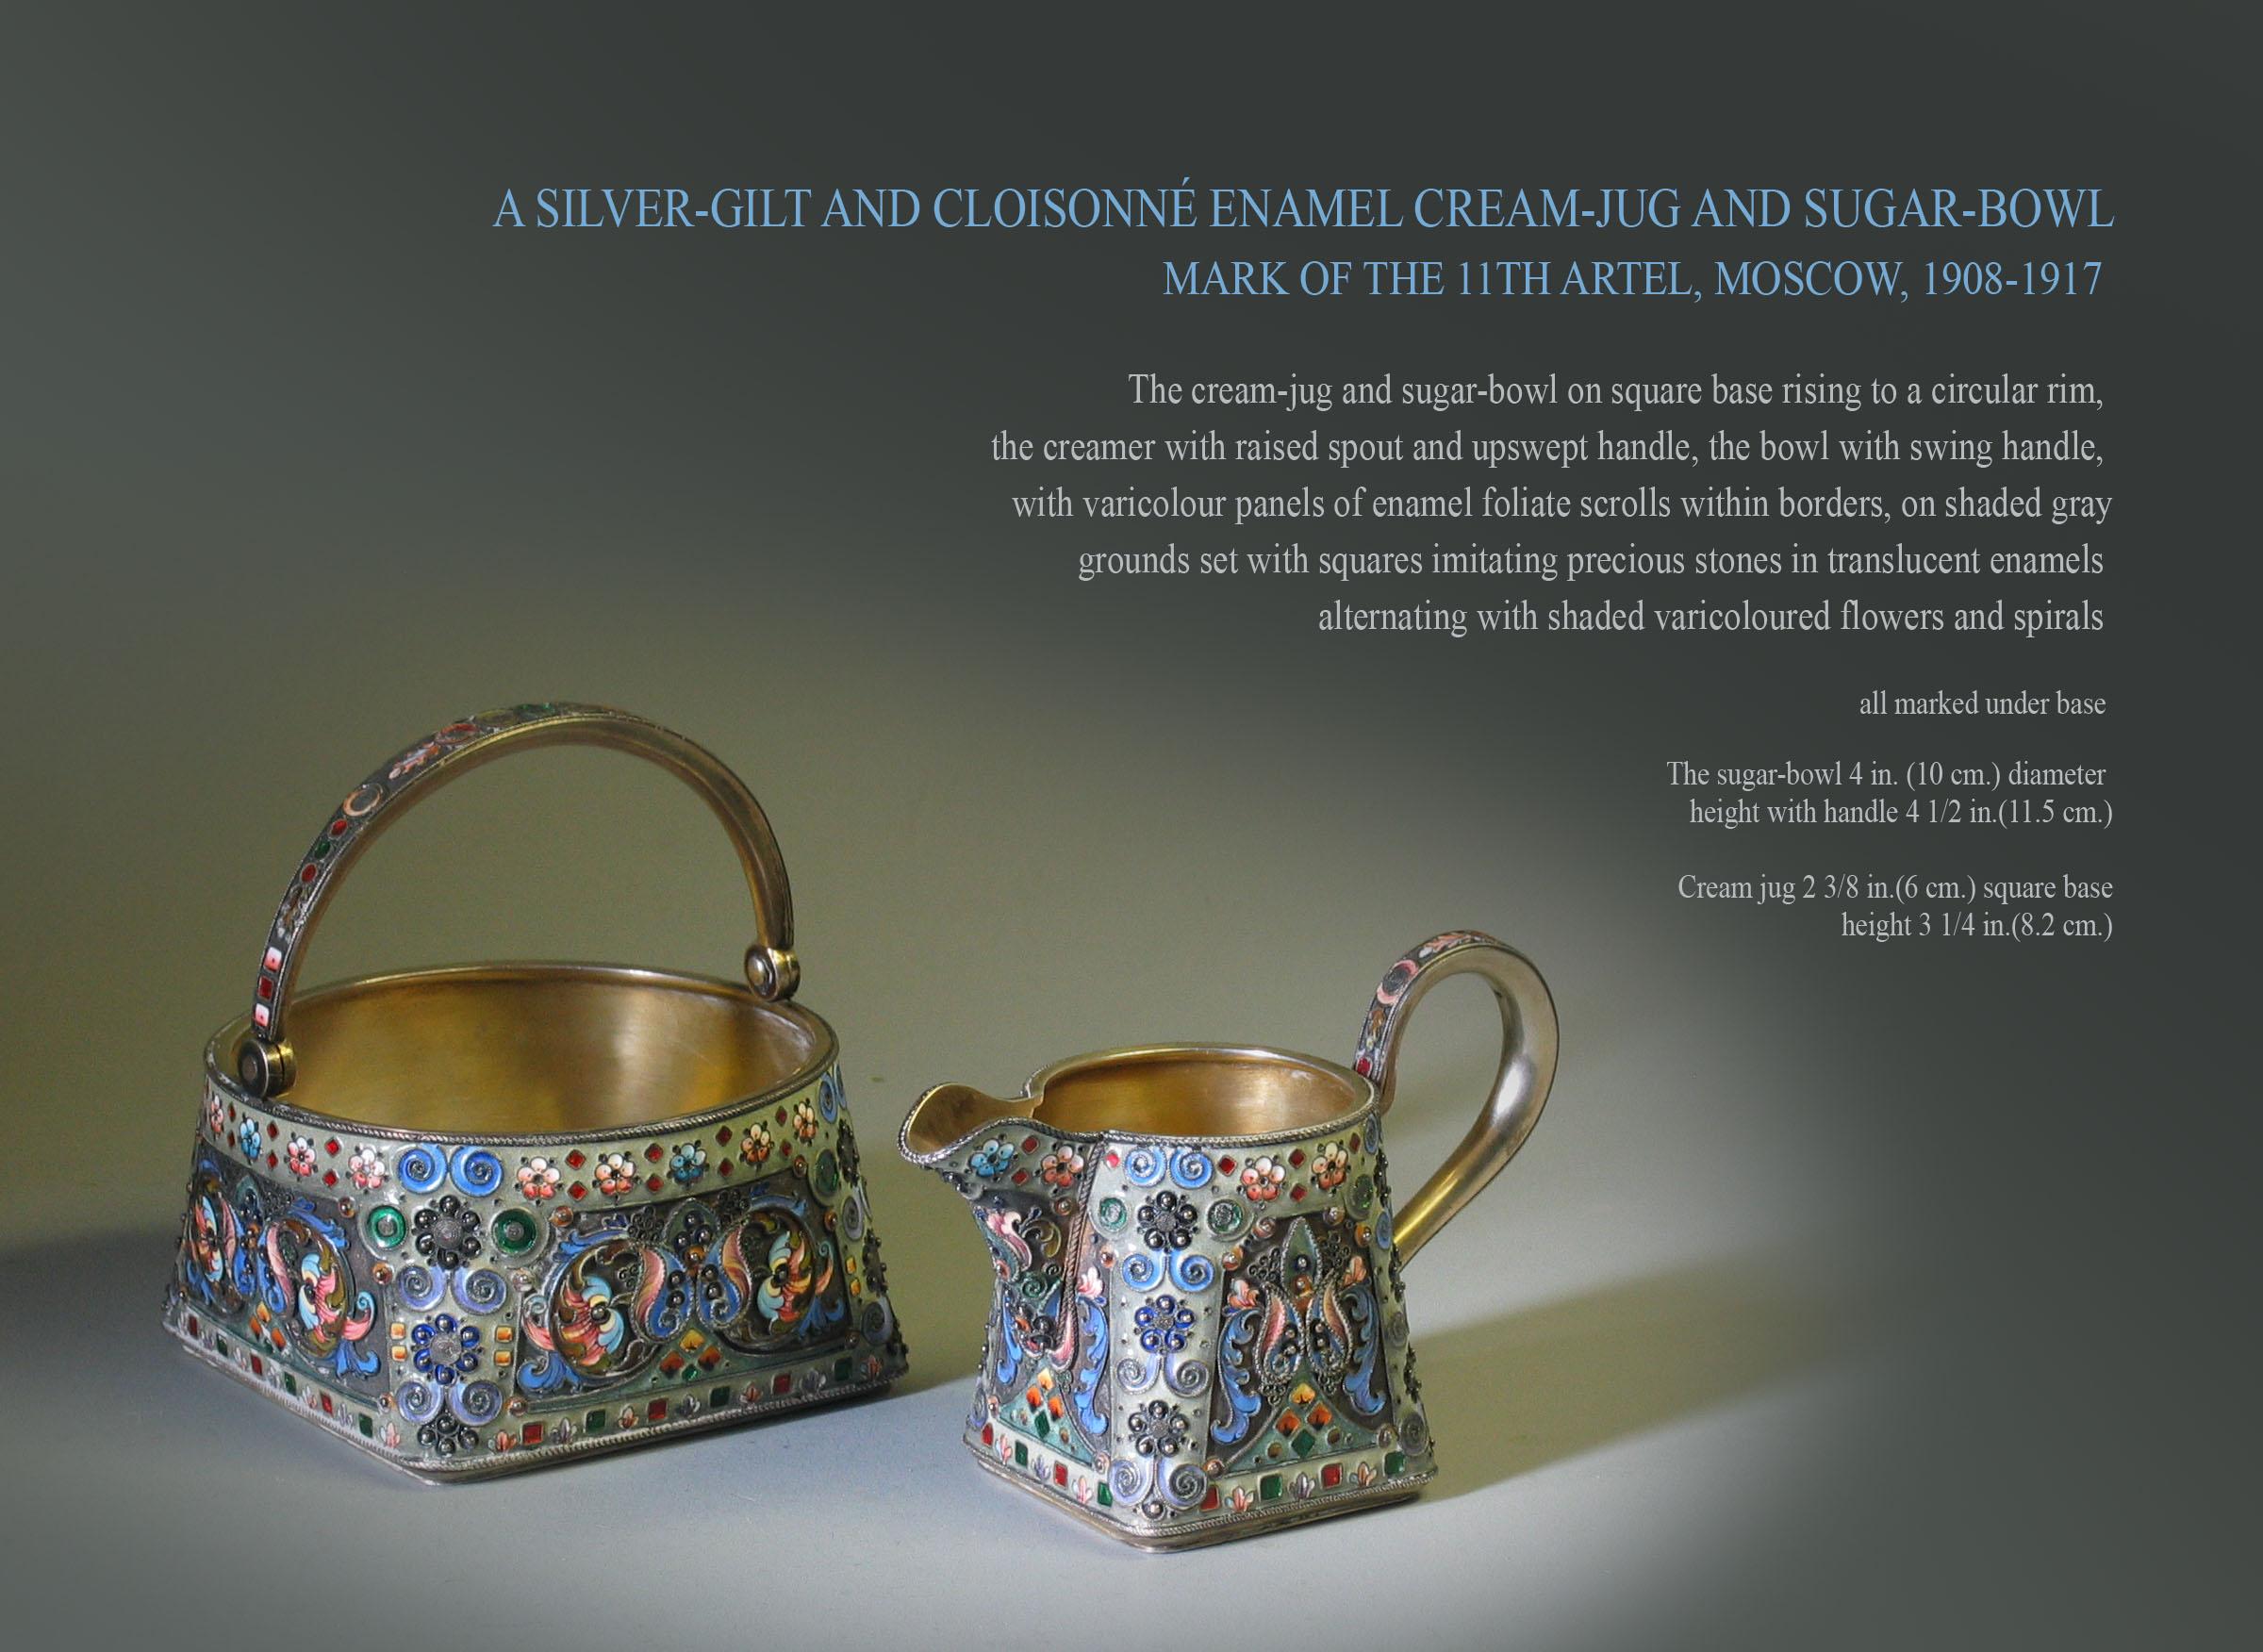 A Silver-gilt and Cloisonné Enamel Cream-jug and Sugar-bowl
Mark Of The 11th Artel, Moscow, 1908-1917

The cream-jug and sugar-bowl on square base rising to a circular rim, 
the creamer with raised spout and upswept handle, the bowl with swing